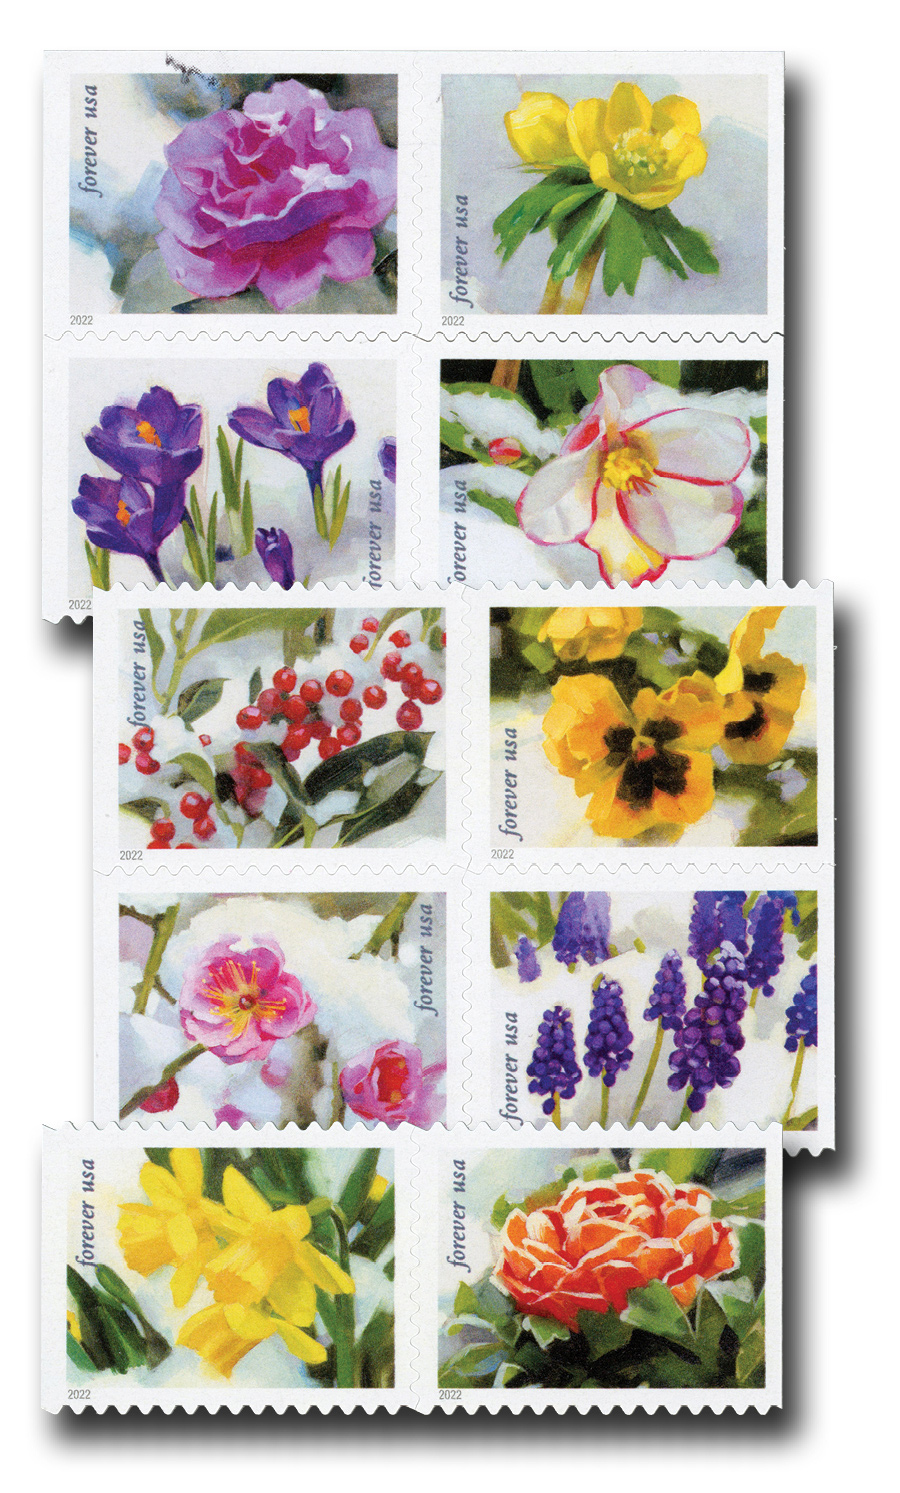 2022 Global Forever International Mail African Daisy Postage Stamps (1  Sheet, 10 Stamps)